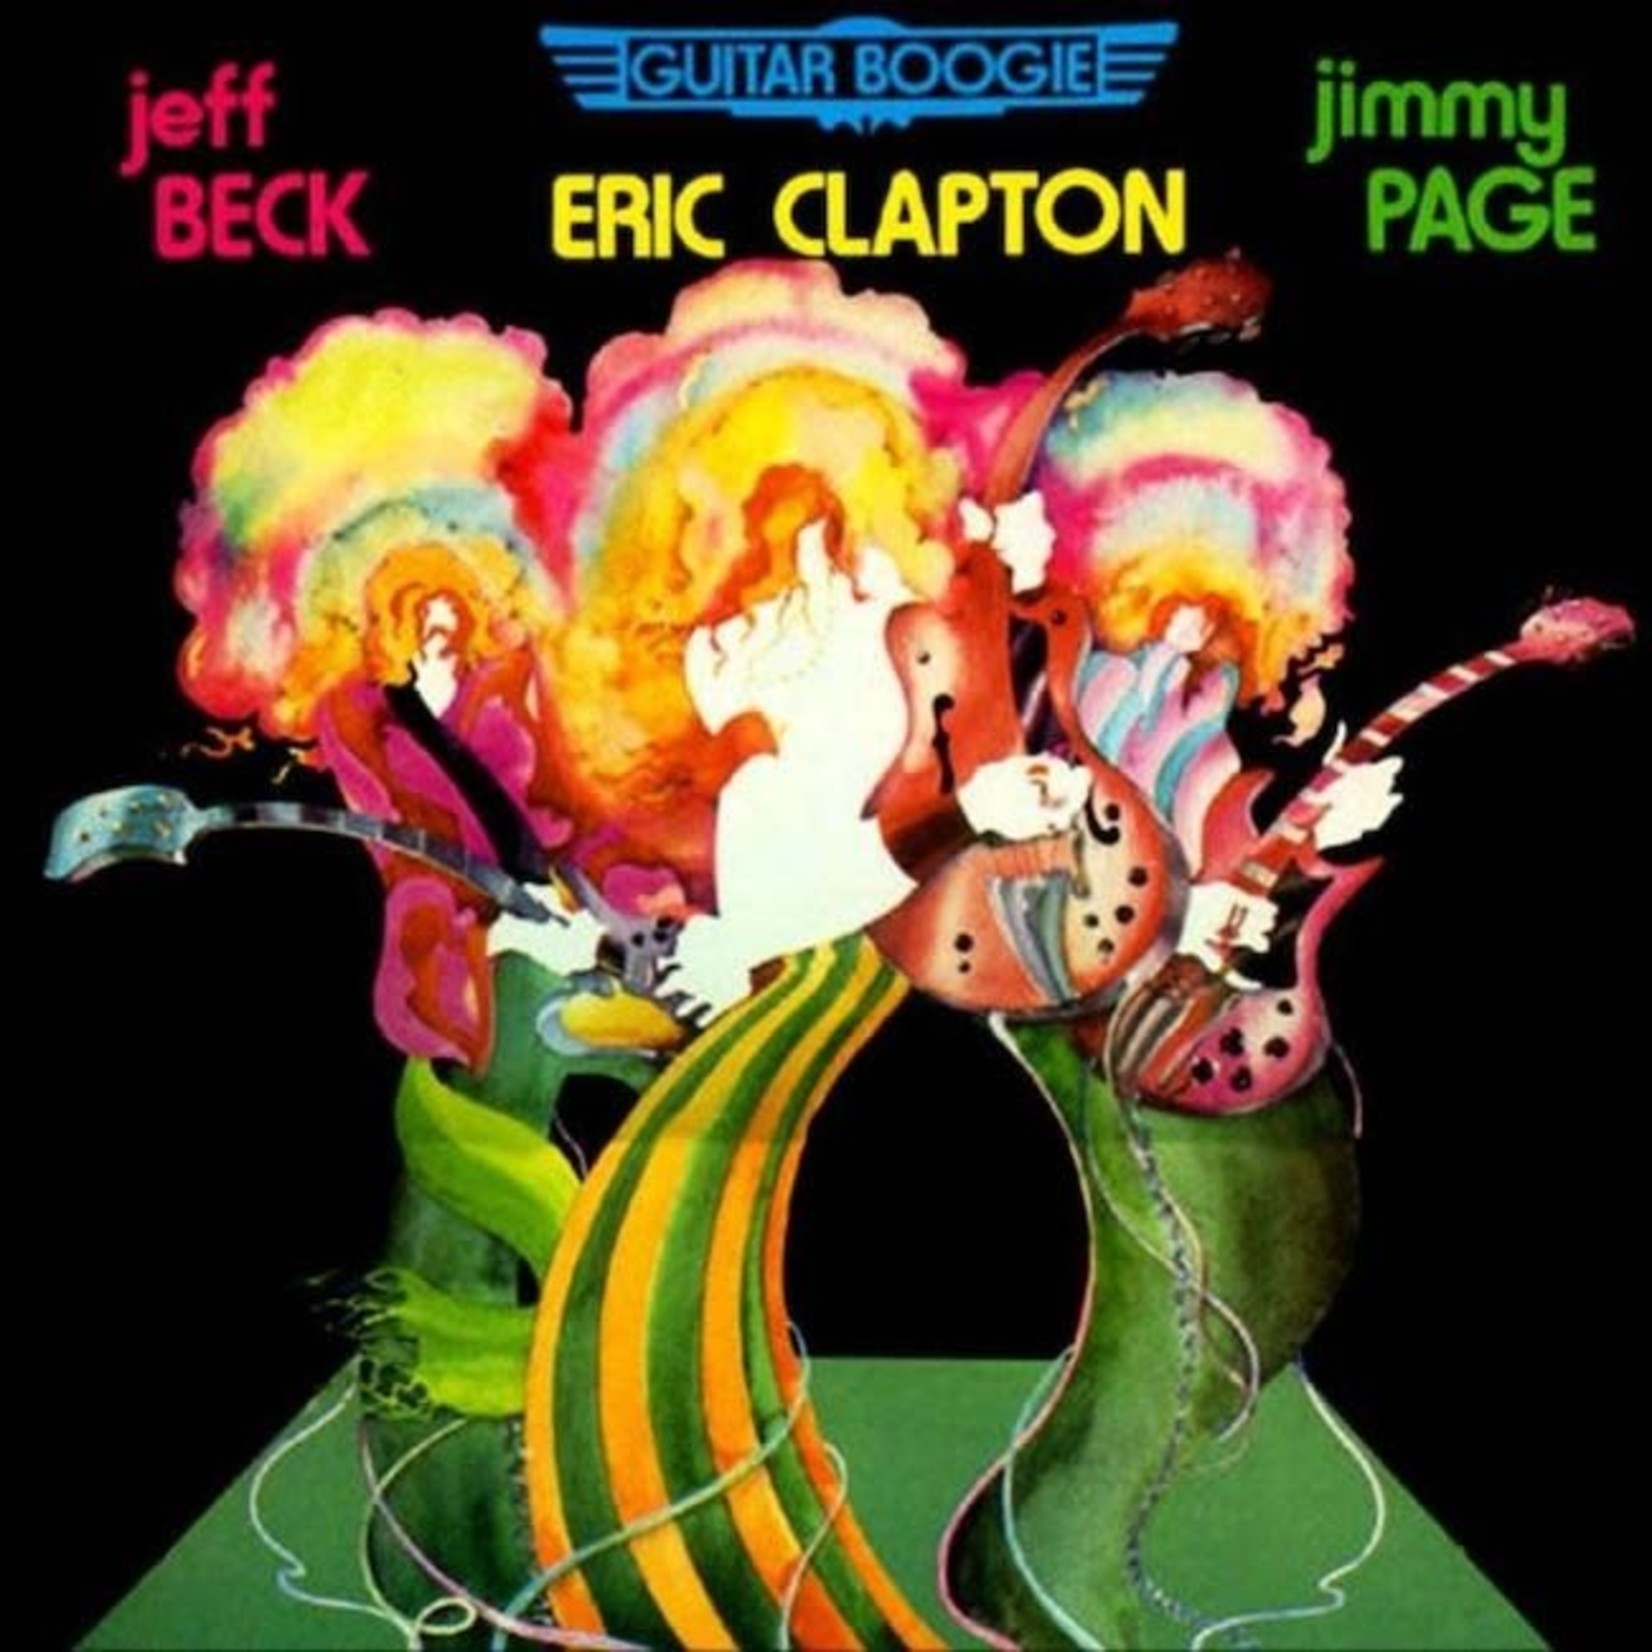 [Vintage] Eric Clapton with Jeff Beck & Jimmy Page - Guitar Boogie